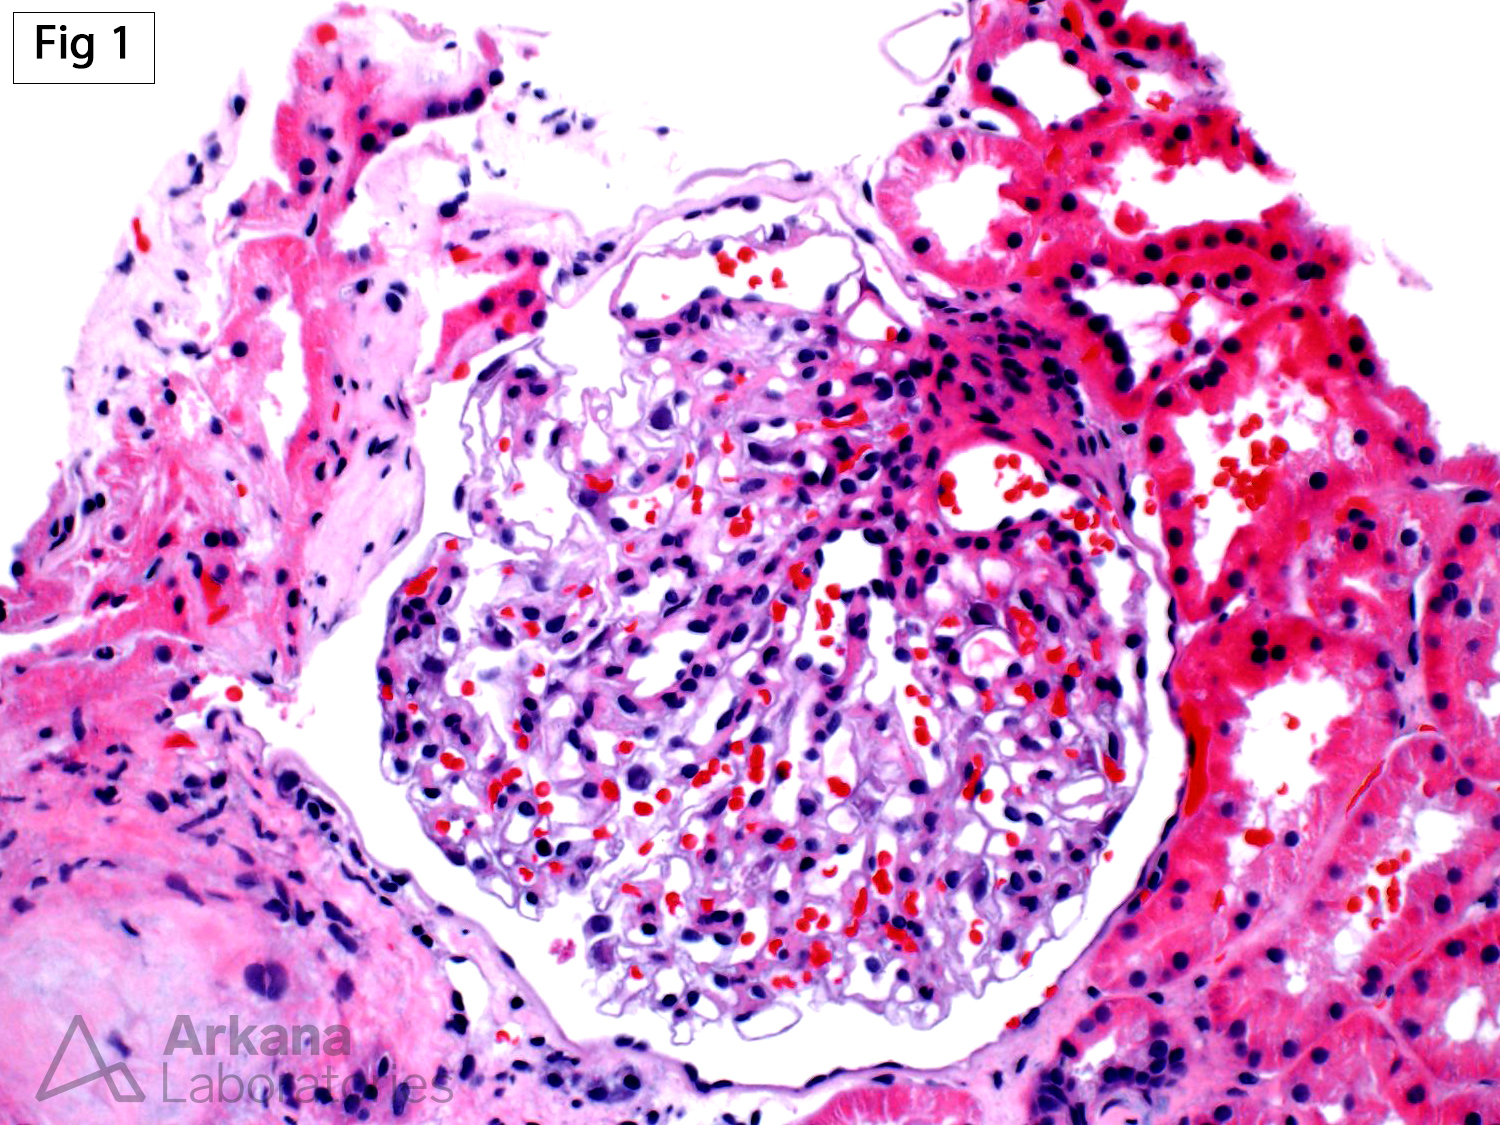 Glomerulomegaly in renal biopsy